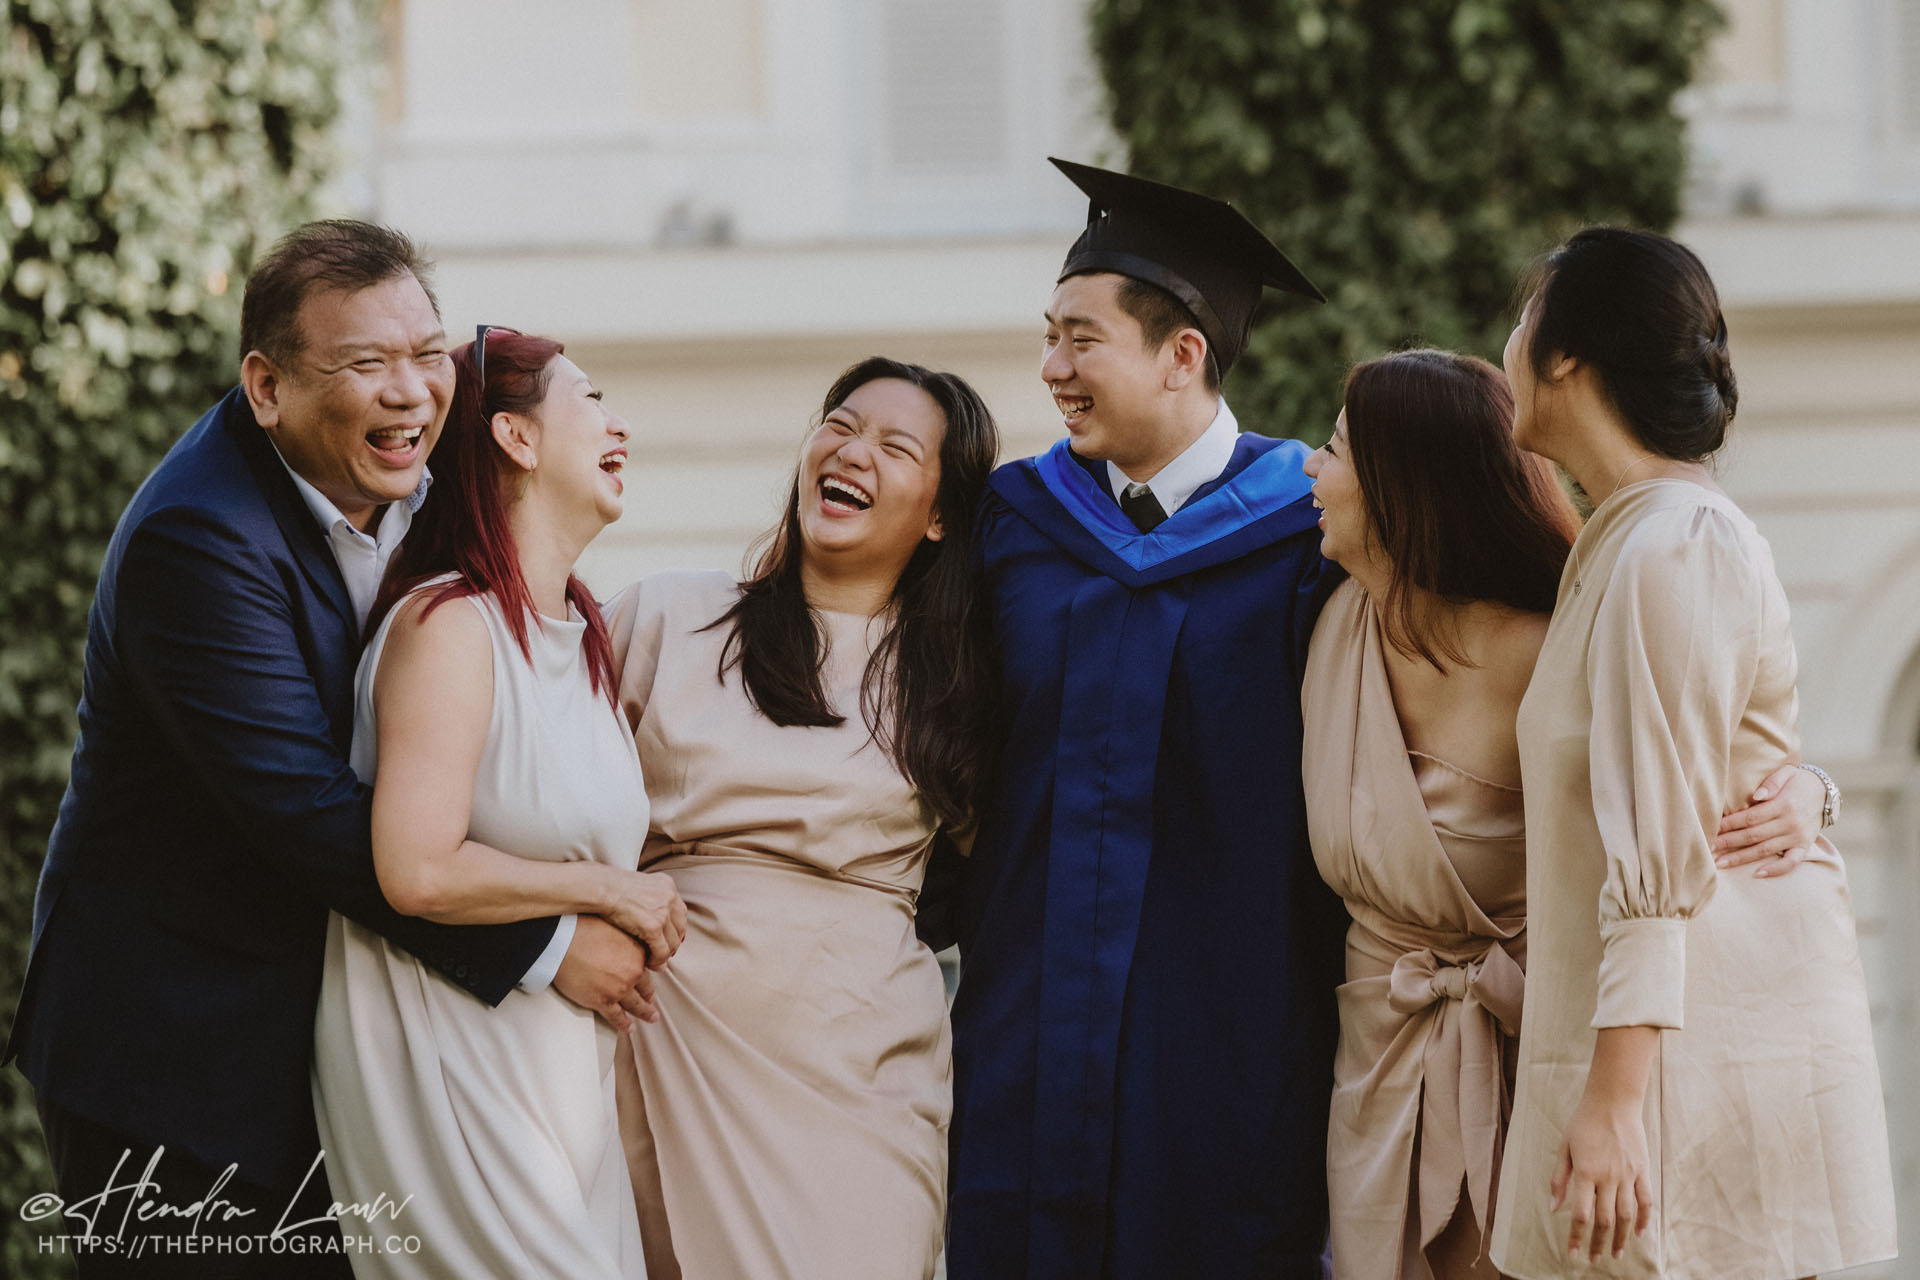 Candid outdoor graduation and family photoshoot at Asian Civilisations Museum